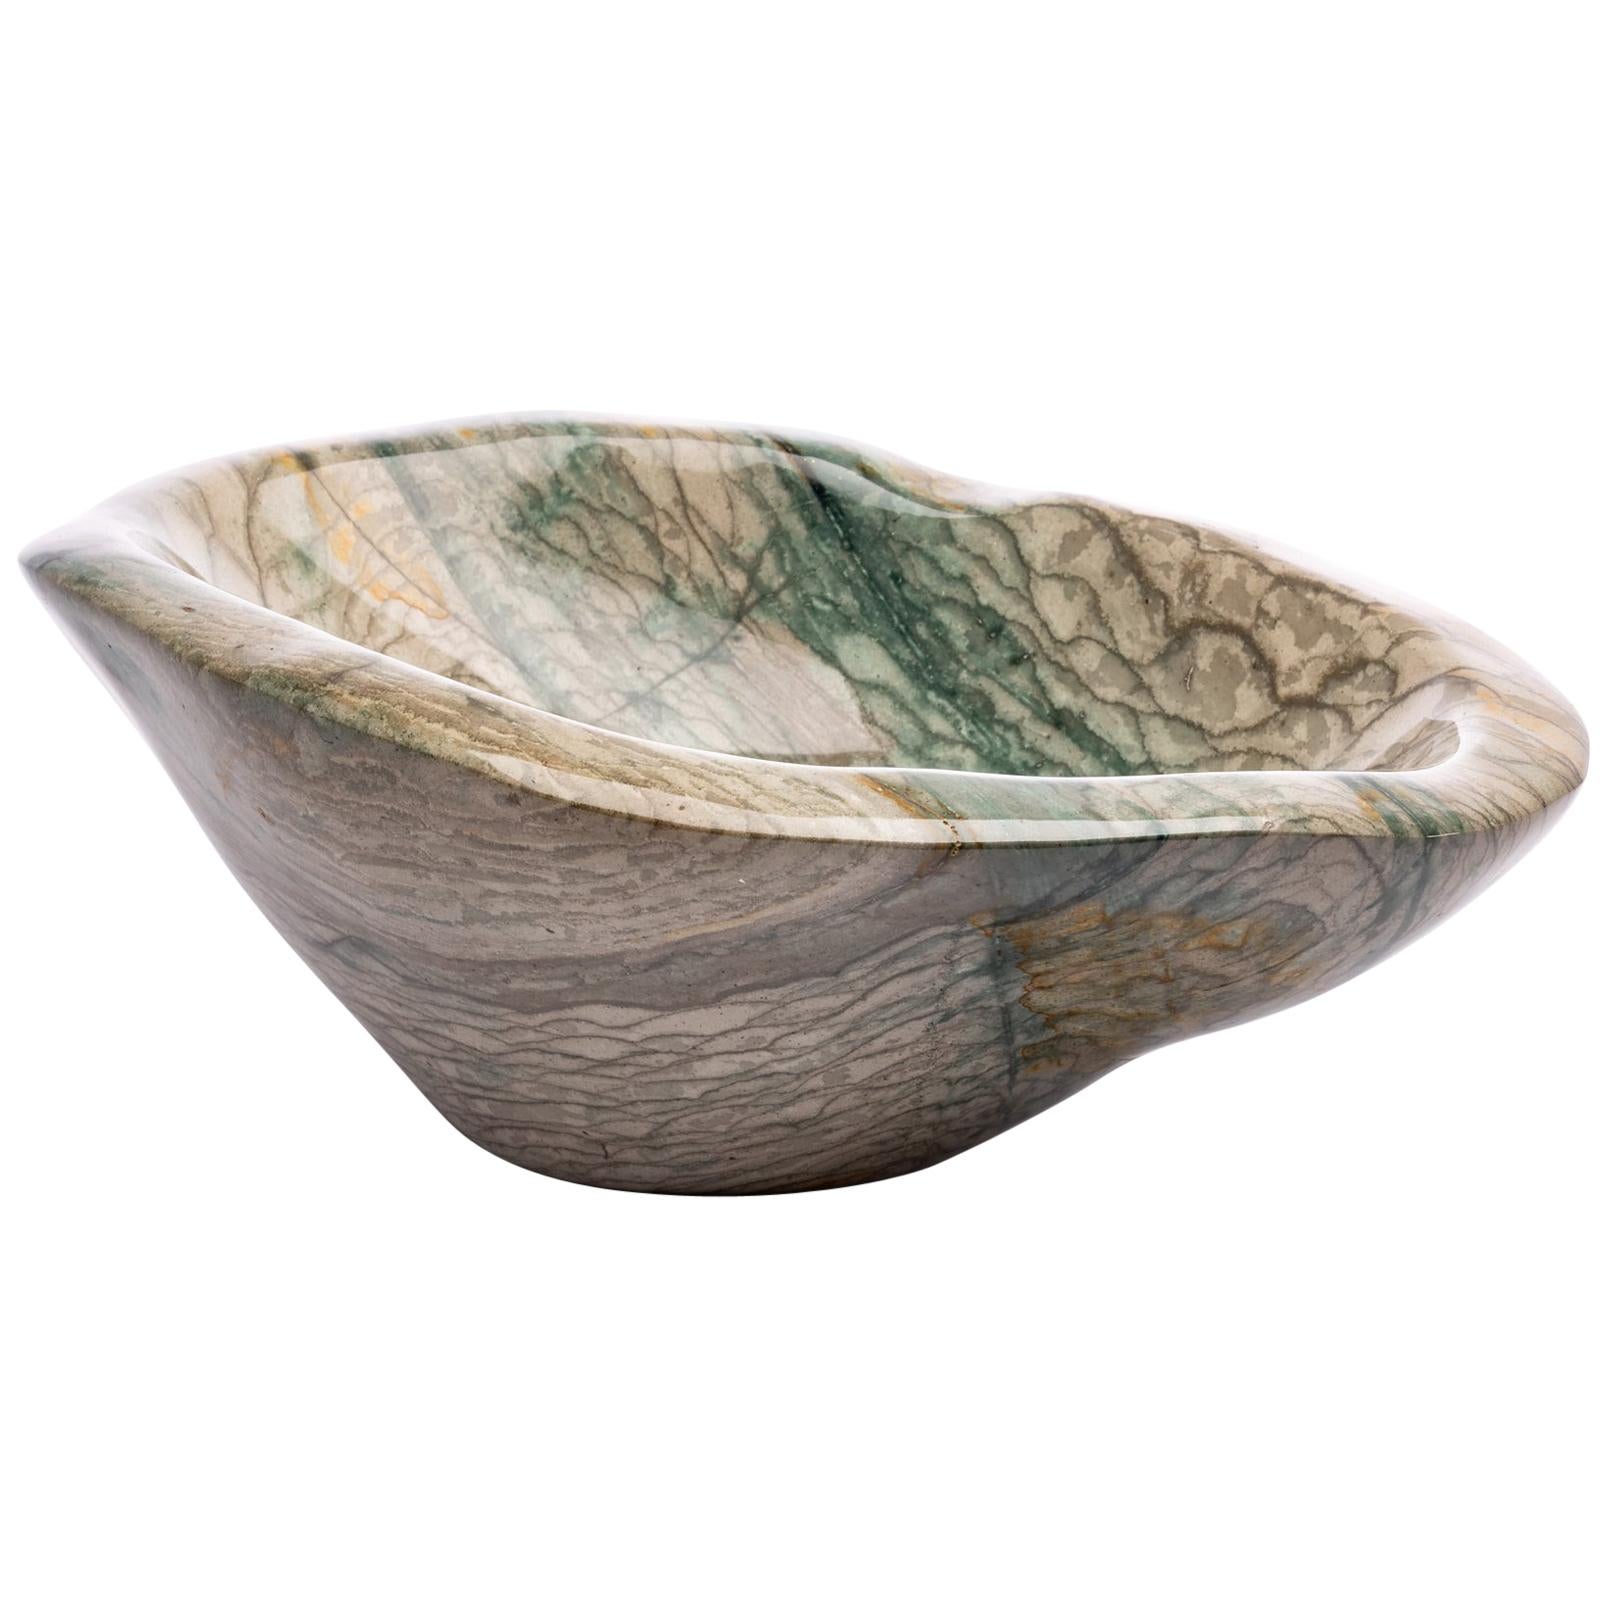 Large Green and White Shade Jasper Handcrafted Bowl from Madagascar